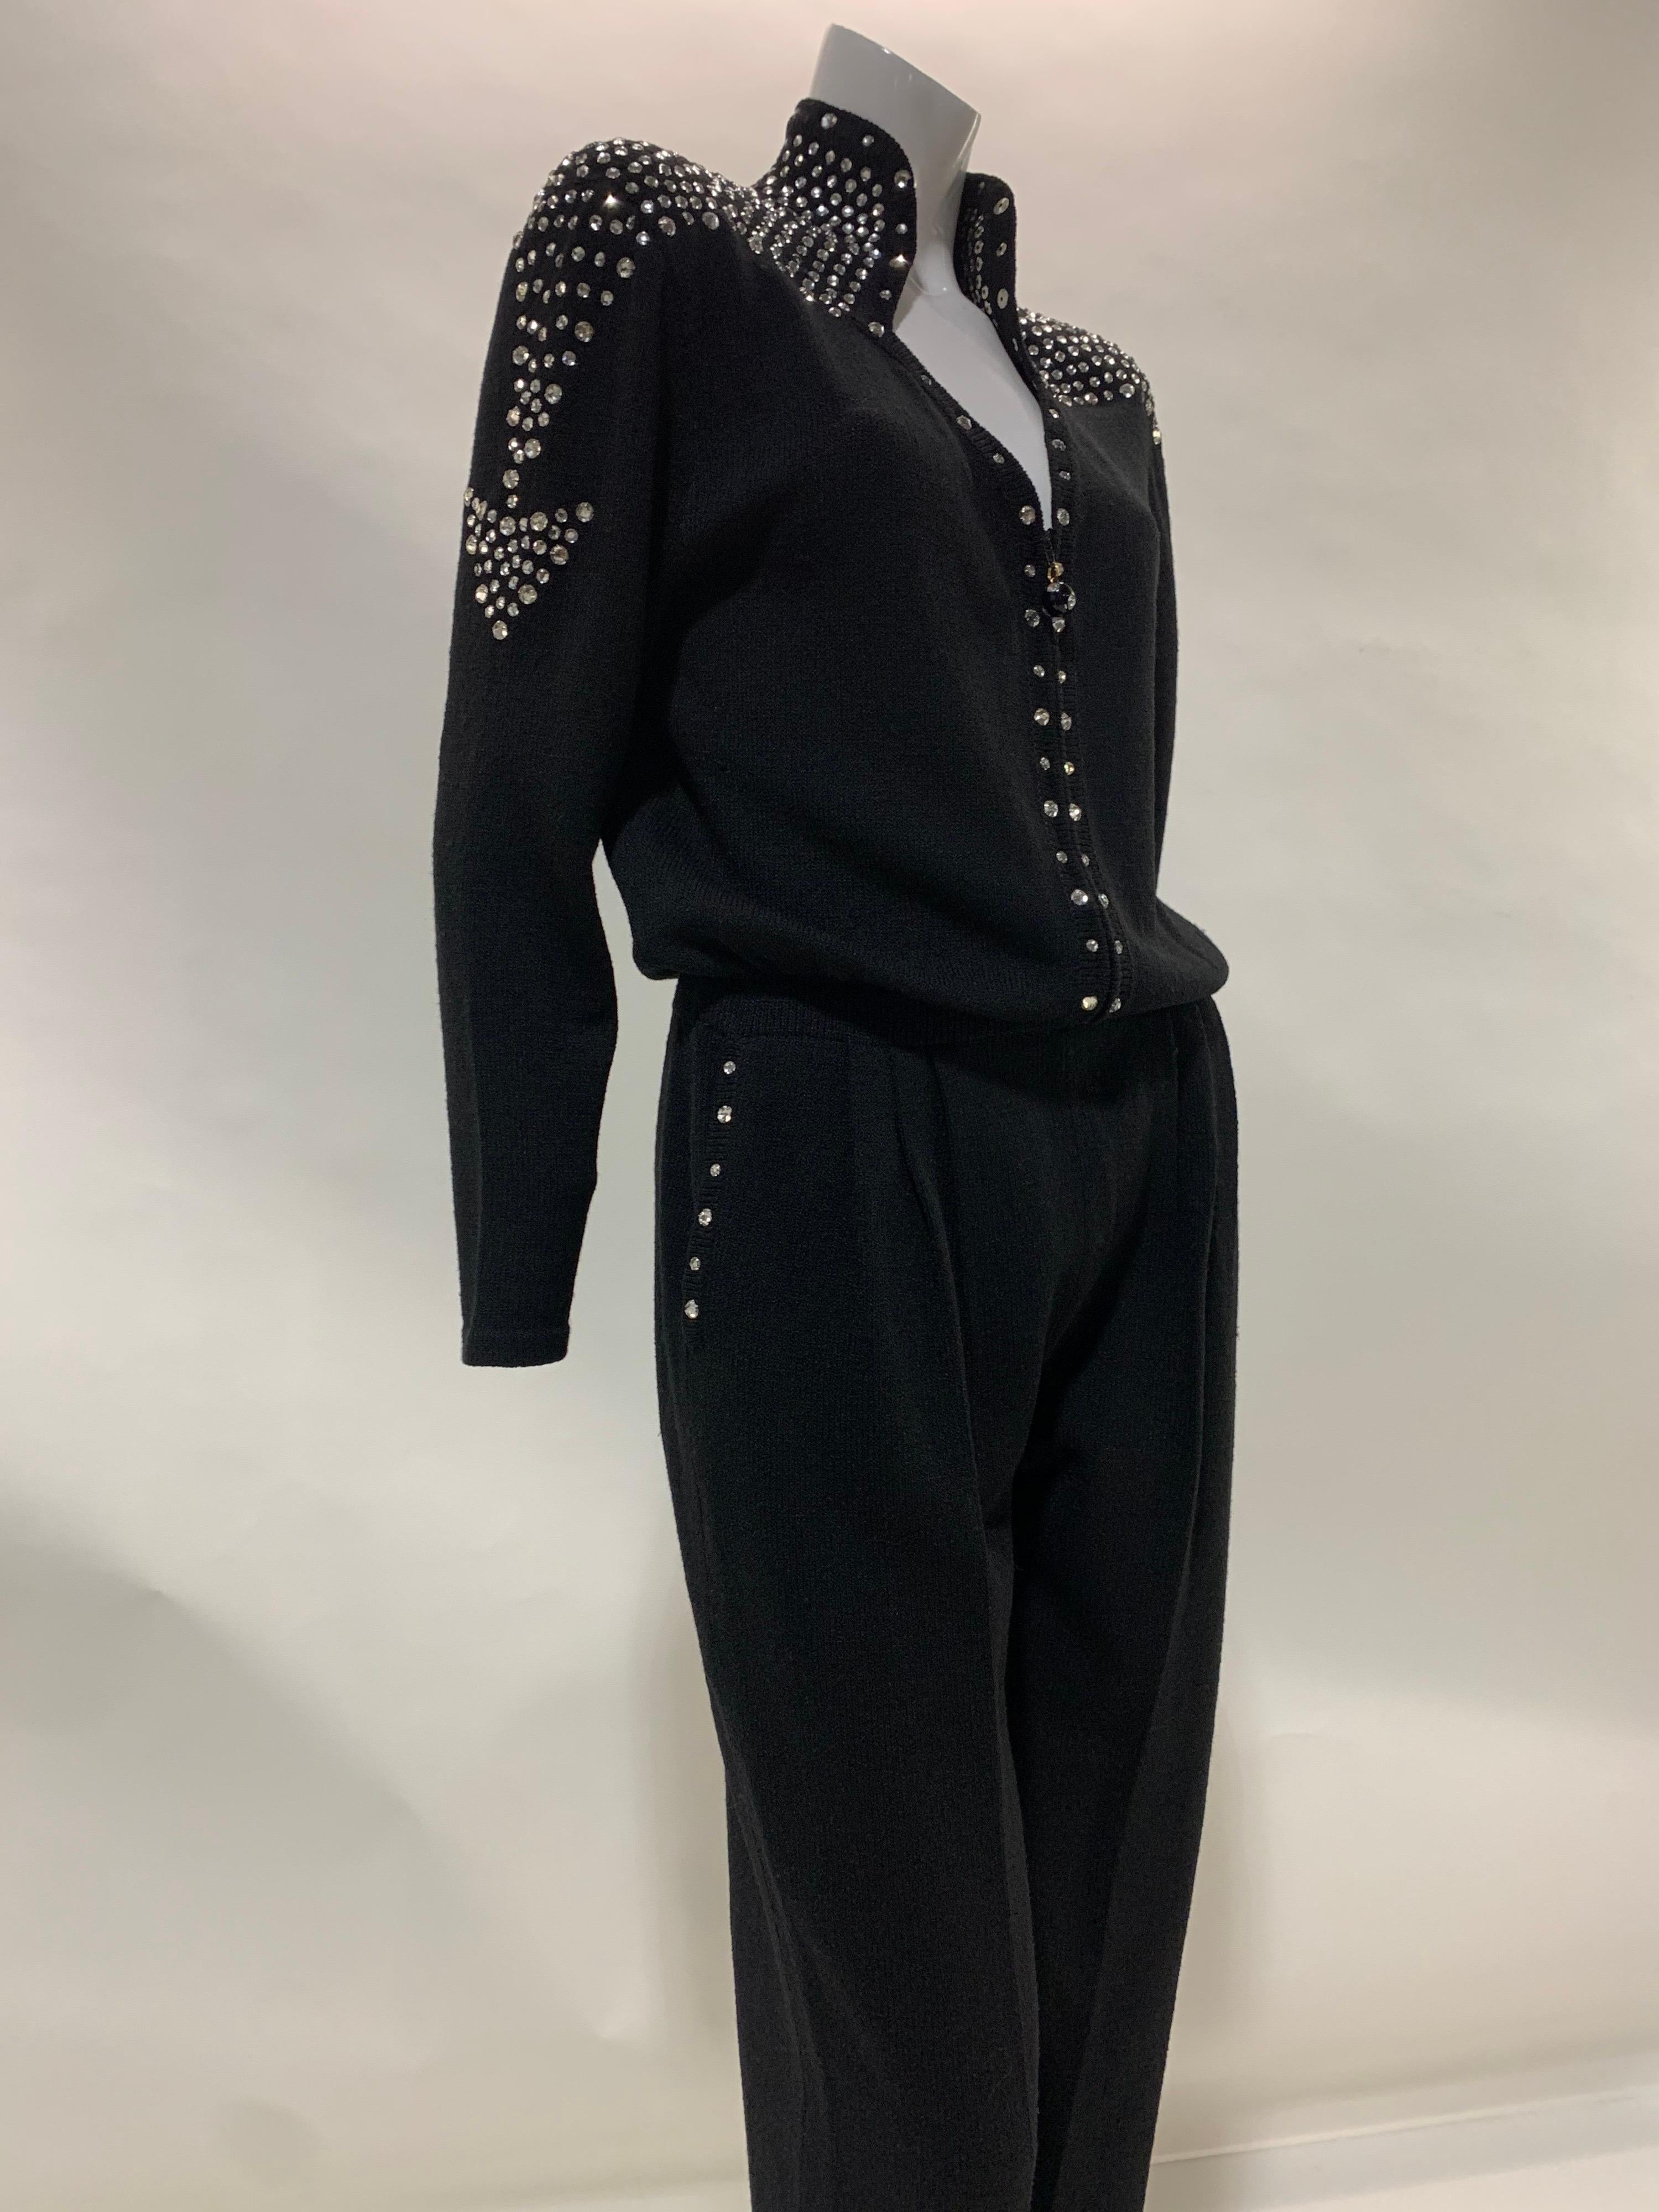 A fabulous 1980s black rayon knit jumpsuit with stovepipe legs padded structured shoulders that are heavily embellished with rhinestone arrows traveling over shoulder yolk and down upper arm. Front zipper. Size 8-10.